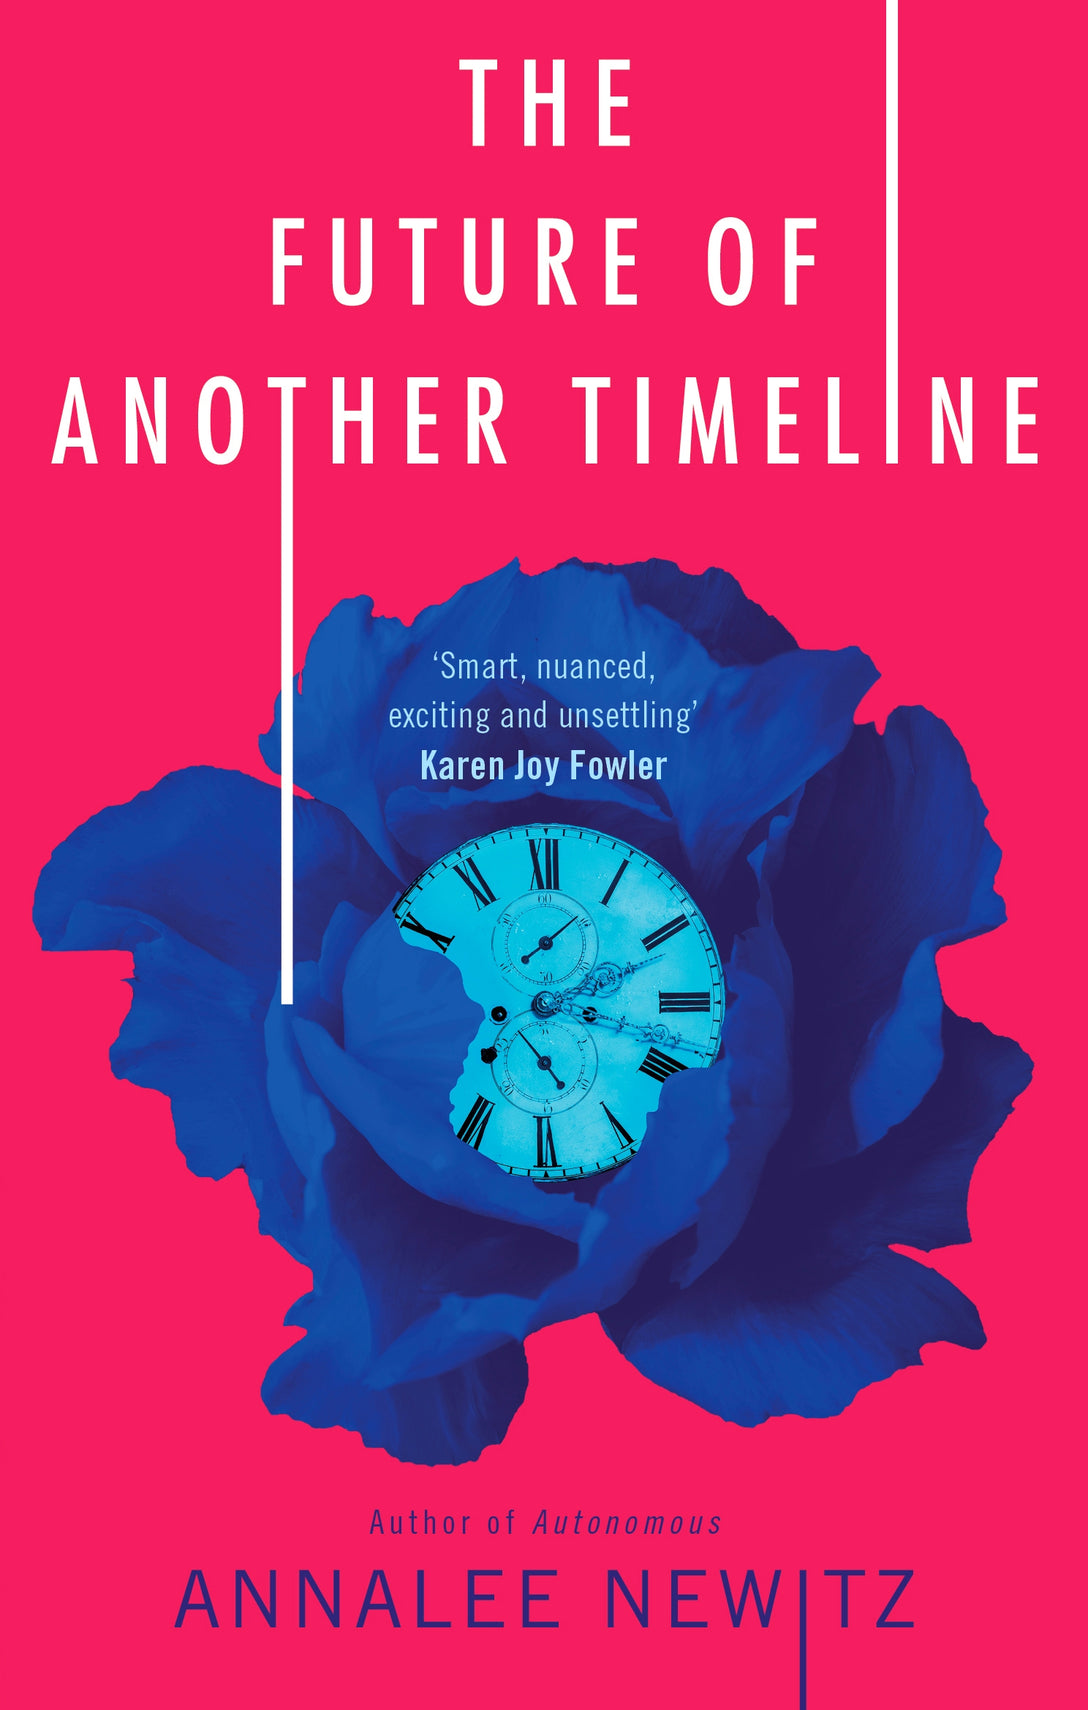 The Future of Another Timeline by Annalee Newitz